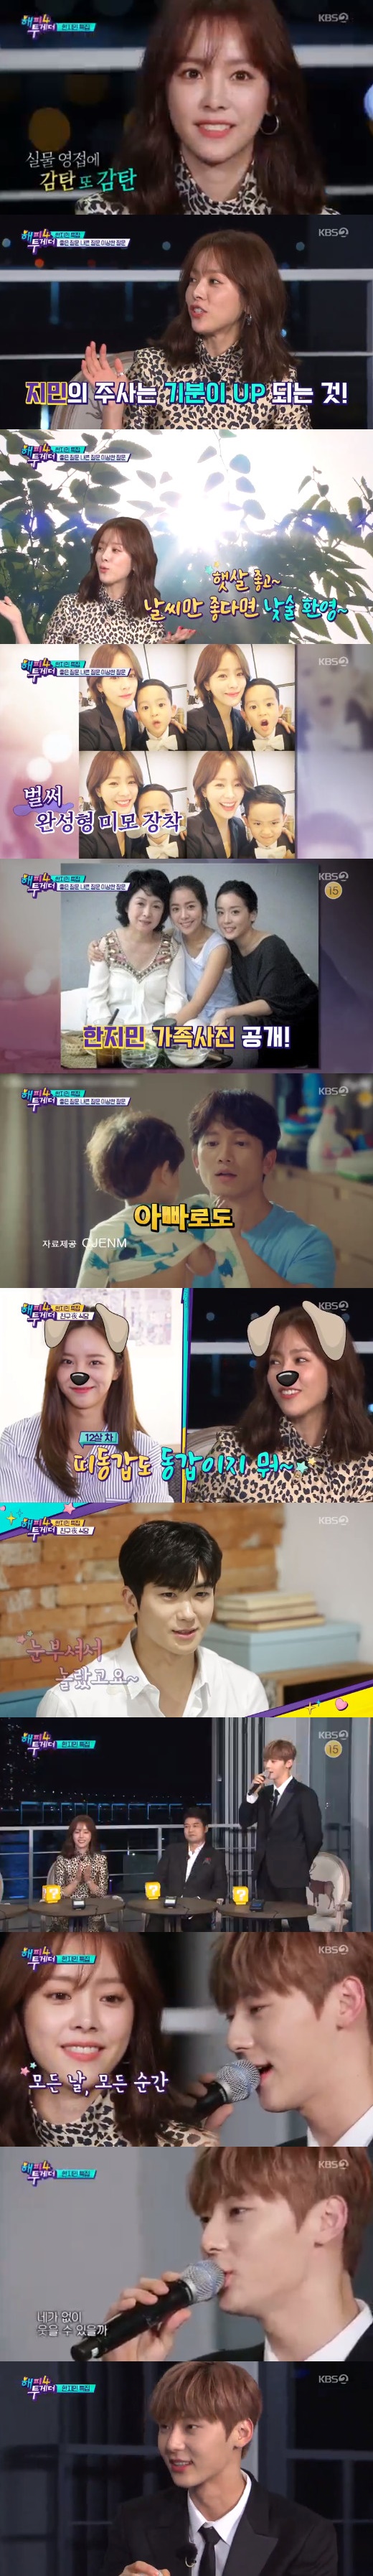 Actor Han Jimin opened the opening of Happy Together with a special gesture.Han Jimin appeared as a guest on the first KBS 2TV Happy Together broadcast on the afternoon of the 11th and performed a limited performance.Han Jimin said that he even listened to veteran MCs with unstoppable words, especially he answered any questions honestly and caught viewers.First, Han Jimin revealed his debut anecdote.Sister was much more beautiful and popular than me, he said. At the time of middle school, Sister was offered a profile photo at the age of two.But Sister was so ashamed of the camera, he said.He also released a story about his debut drama All In (2003).Han Jimin said, At that time, I was a high school student, but the date of the audition for All In and the first family trip schedule of my life overlapped.I have been working as an advertising model since before, but I was not sure that I could do well because it was the first time I acted.So I gave up auditioning and just left family trip. But after returning from the trip, I could not find the main character of Song Hye-kyos child, and eventually I had a chance again.He also laughed at the question of how to know the amount of alcohol.He said, If you think you are drunk, drink water and drink again after you wake up. If the weather is good, you may have a day.Han Jimin also mentioned the actors who had been breathing together.He recently said, My heart is so clear as clear eyes. He said, I respect my best because I do my best as an actor, but as a father and as a husband, my life is really doing my best.I thought I wanted to have such a happy family while watching my senior. On the other hand, Lee Seo-jin has been sprinkled with the perfume of cucumber flavor that was presented during the Discrete script reading.But Lee Seo-jin had told me to go away because he was the least favorite scent. I actually read out the window.Han Jimin said, Lee Seo-jin brother checks whether one of the assistant performers or one of the gods appears and receives the payment.I take care of people well. Han Jimins best friends made a surprise appearance in the video, adding to the fun. Girls Day Hyeri said, Jimin Sister and I are friends.I have been in contact with the drama Hyde Jekyll, I four years ago.Jimin Sister has appeared in the entertainment for a long time, but I hope it will help a little. Park Hyung-sik, who made a connection with the short film Two Lights: Lilumino, recalled his first encounter, I was surprised that Han Jimins visuals were brilliant, and I remember being warm and good.In addition, Han Jimin revealed the reason for appearing in the new film Mitsubac. He said, Child abuse is a problem not only in Korea but also in any country in the world.I was sorry and responsible as an adult, and I decided to appear because I thought I would like to make a lot of these works. Group Wanna One member Hwang Min-hyun, who was on the special MC on the day, also performed brilliantly. He confessed his enthusiasm for Han Jimin and attracted attention.Hwang Min-hyun said, My sister is a fan of Han Jimin. She said, I want to come to the recording scene too much.I was so embarrassed that I was very opposed to it. Since then, Hwang Min-hyun has given Han Jimin a sweet serenade.With a sweet tone, Paul Kims Every Day, Every Moment was enthusiastic, snipping Han Jimins heart properly.It was a meaningful time - I was so happy to be with my favorite Han Jimin, said Hwang Min-hyun.